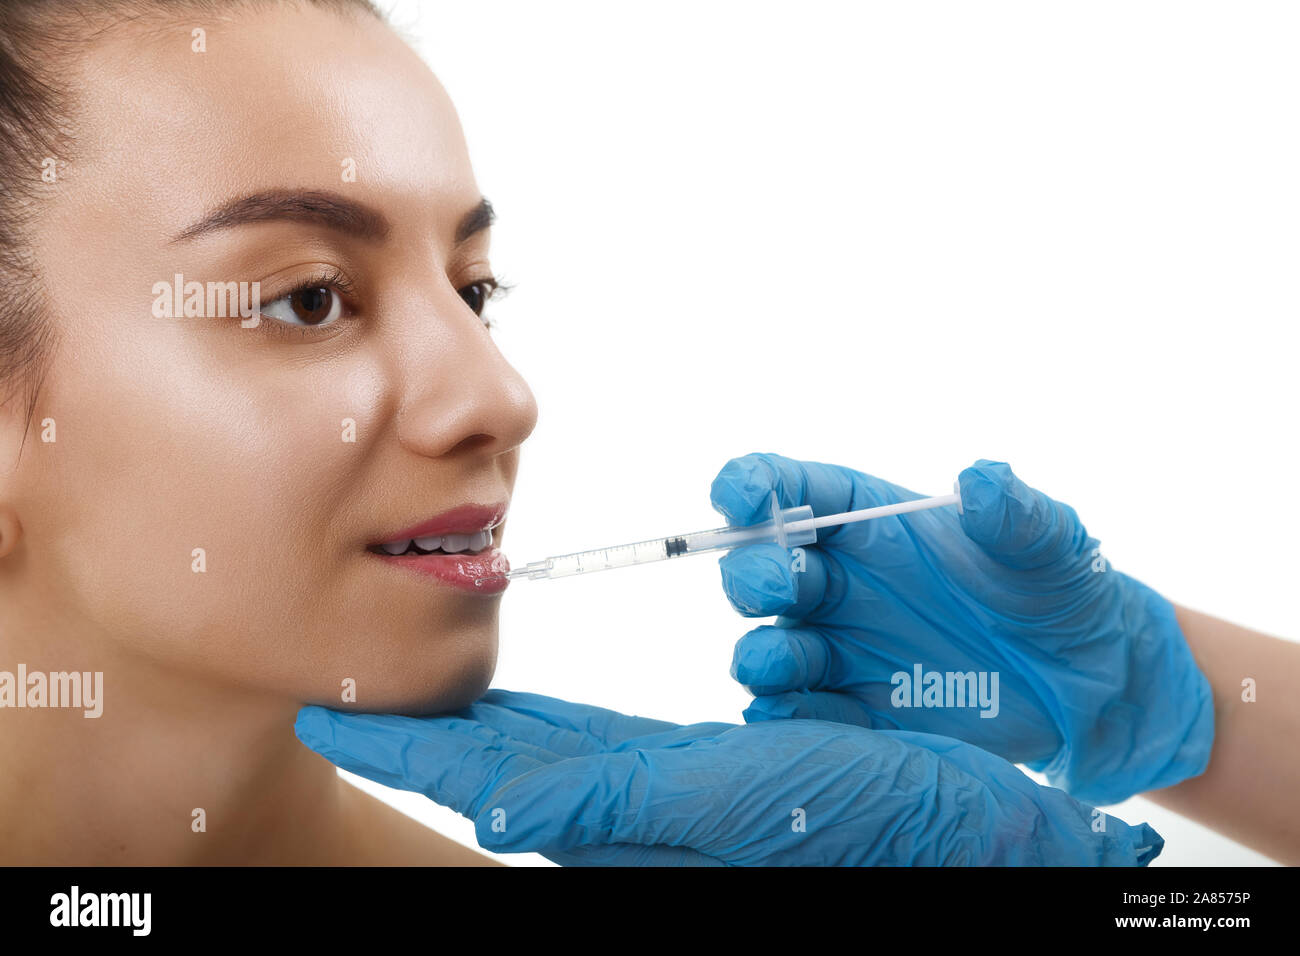 Facial Beauty Injections. Portrait Beautiful Young Woman Receiving Hyaluronic Acid Injection. Closeup Of Hands In Gloves Holding Syringe Near Stock Photo